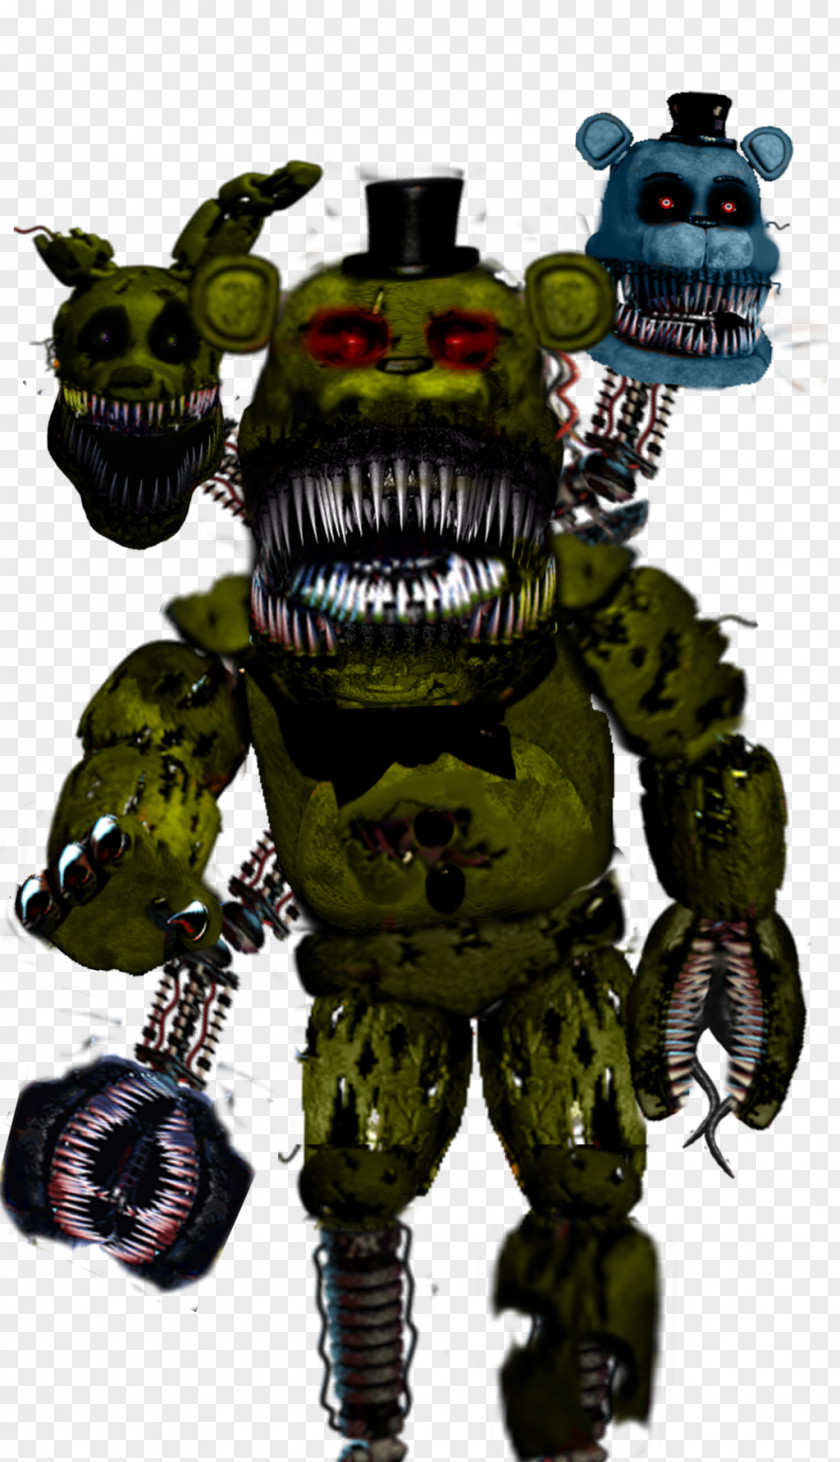 Tetanus Five Nights At Freddy's 4 The Joy Of Creation: Reborn Coloring Book Minecraft PNG